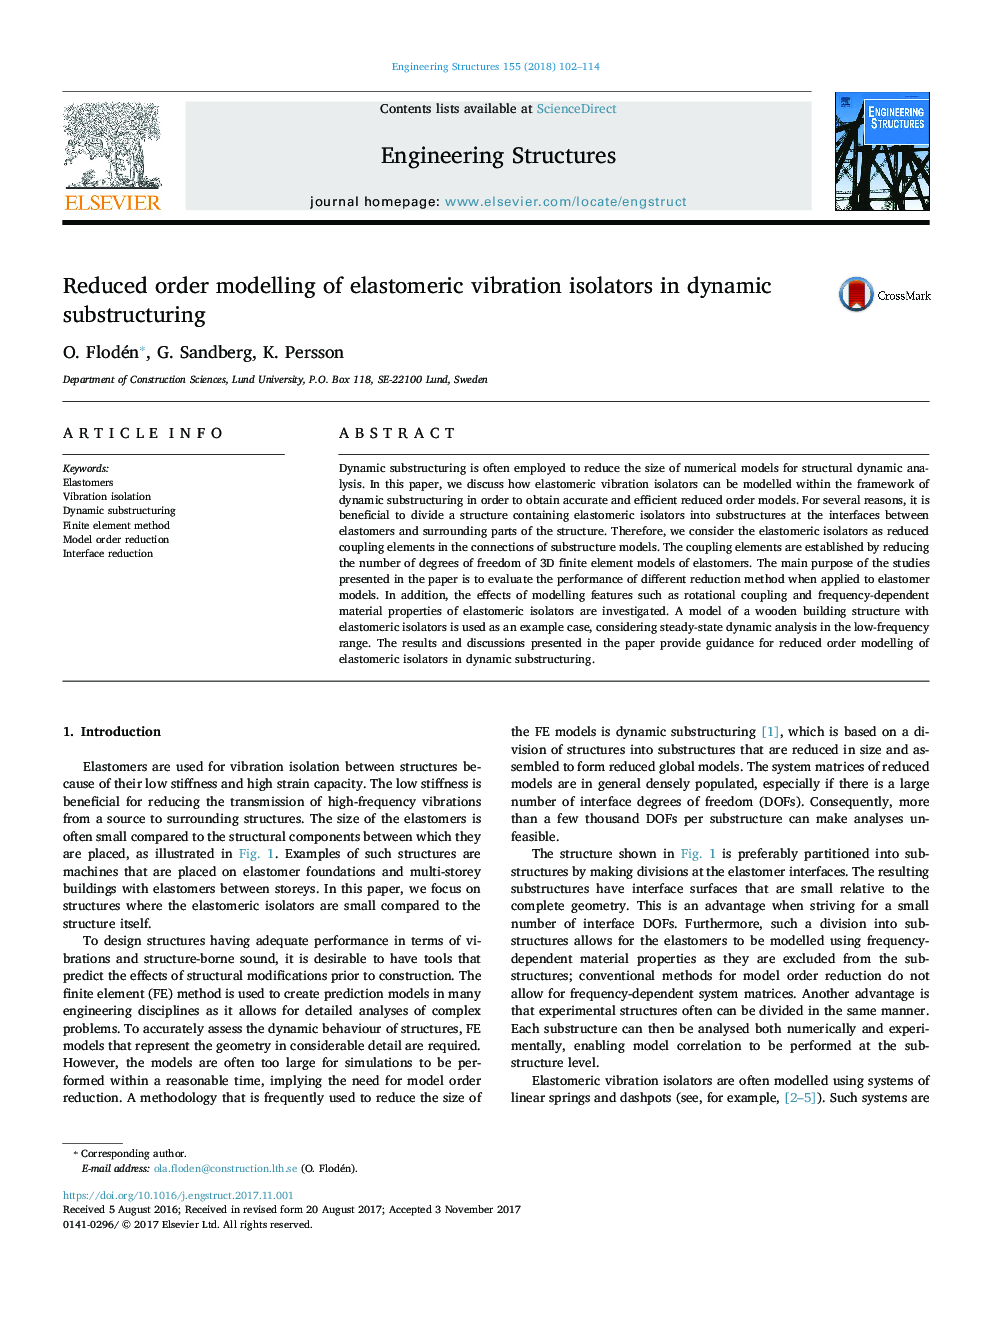 Reduced order modelling of elastomeric vibration isolators in dynamic substructuring